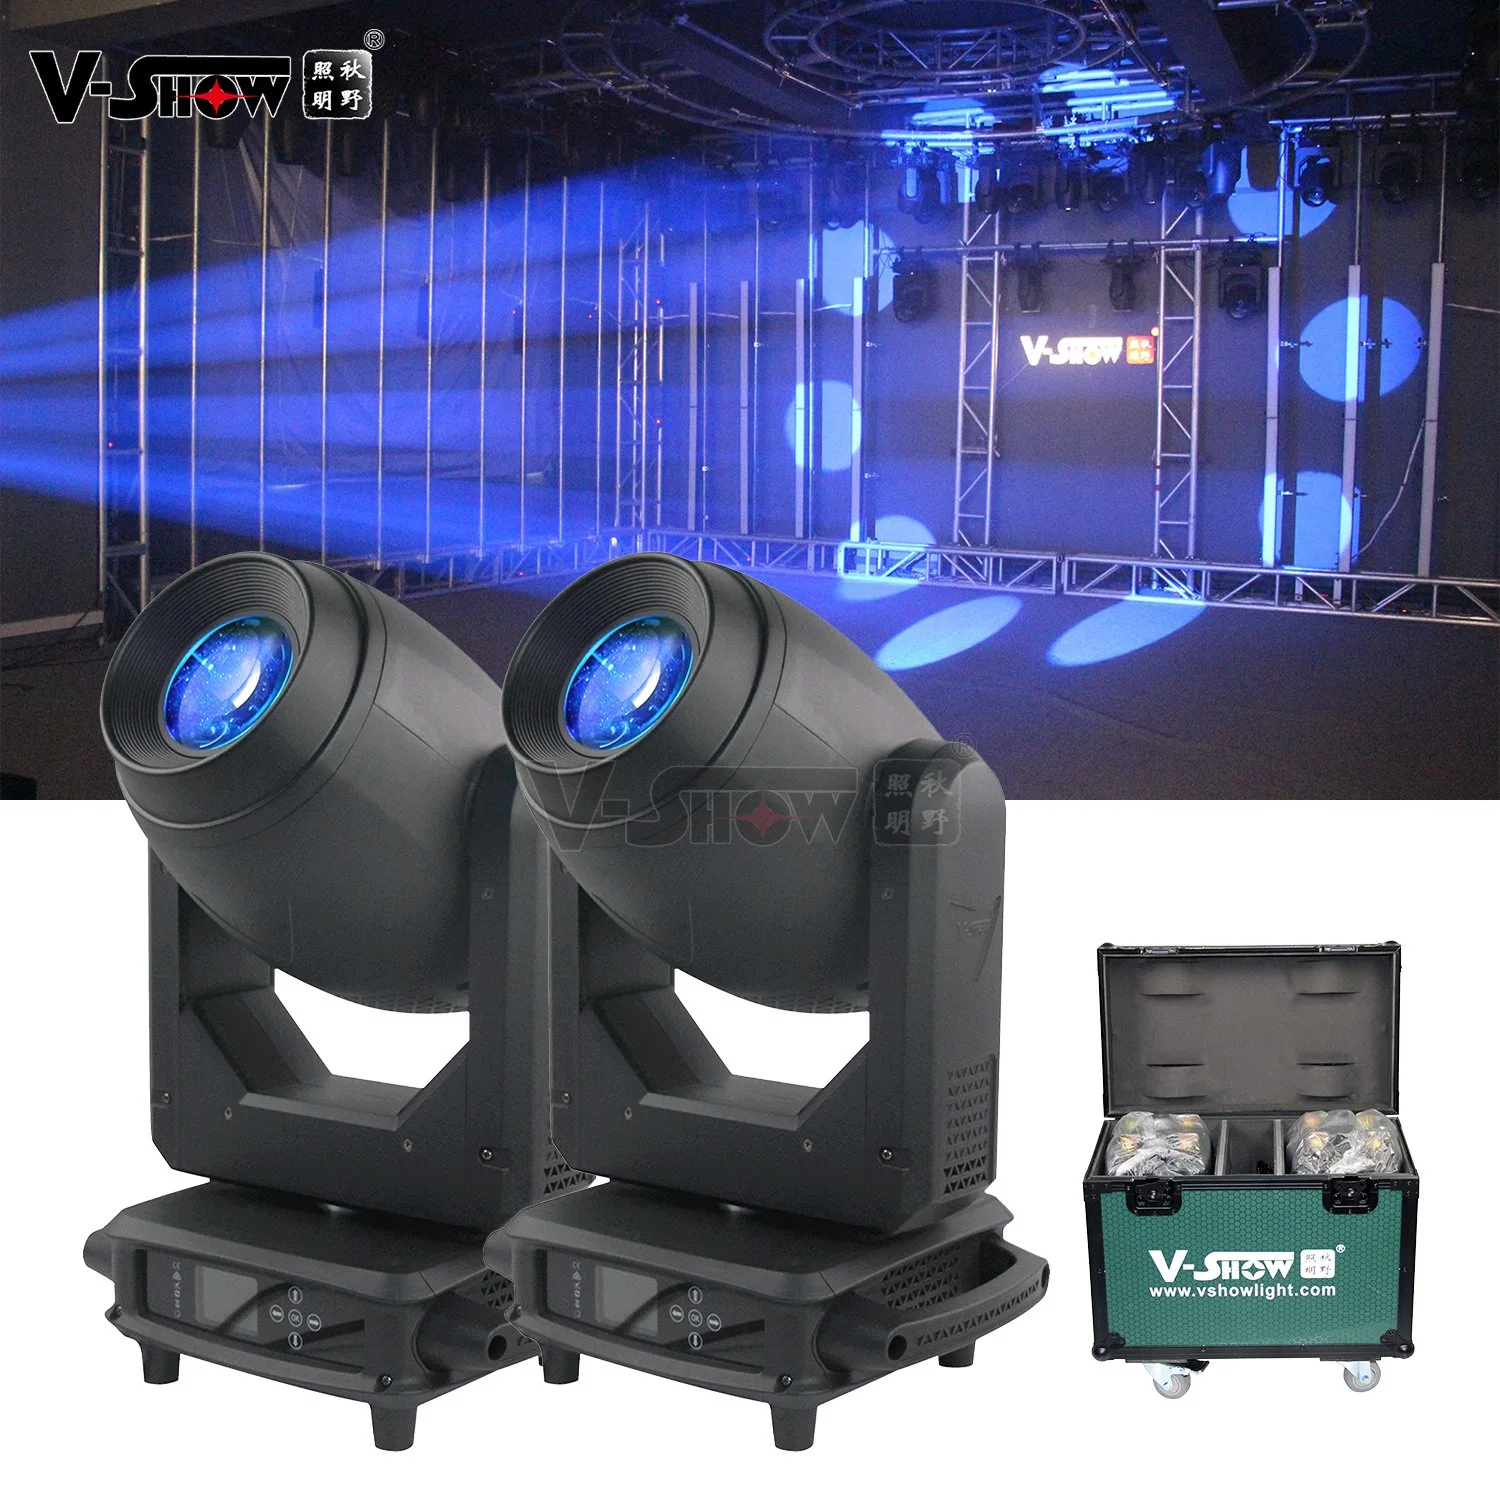 V-Show 2PCS with Flycase Bsw 200watt 3 in 1 Beam Spot Wash Moving Head Light Stage Equipment